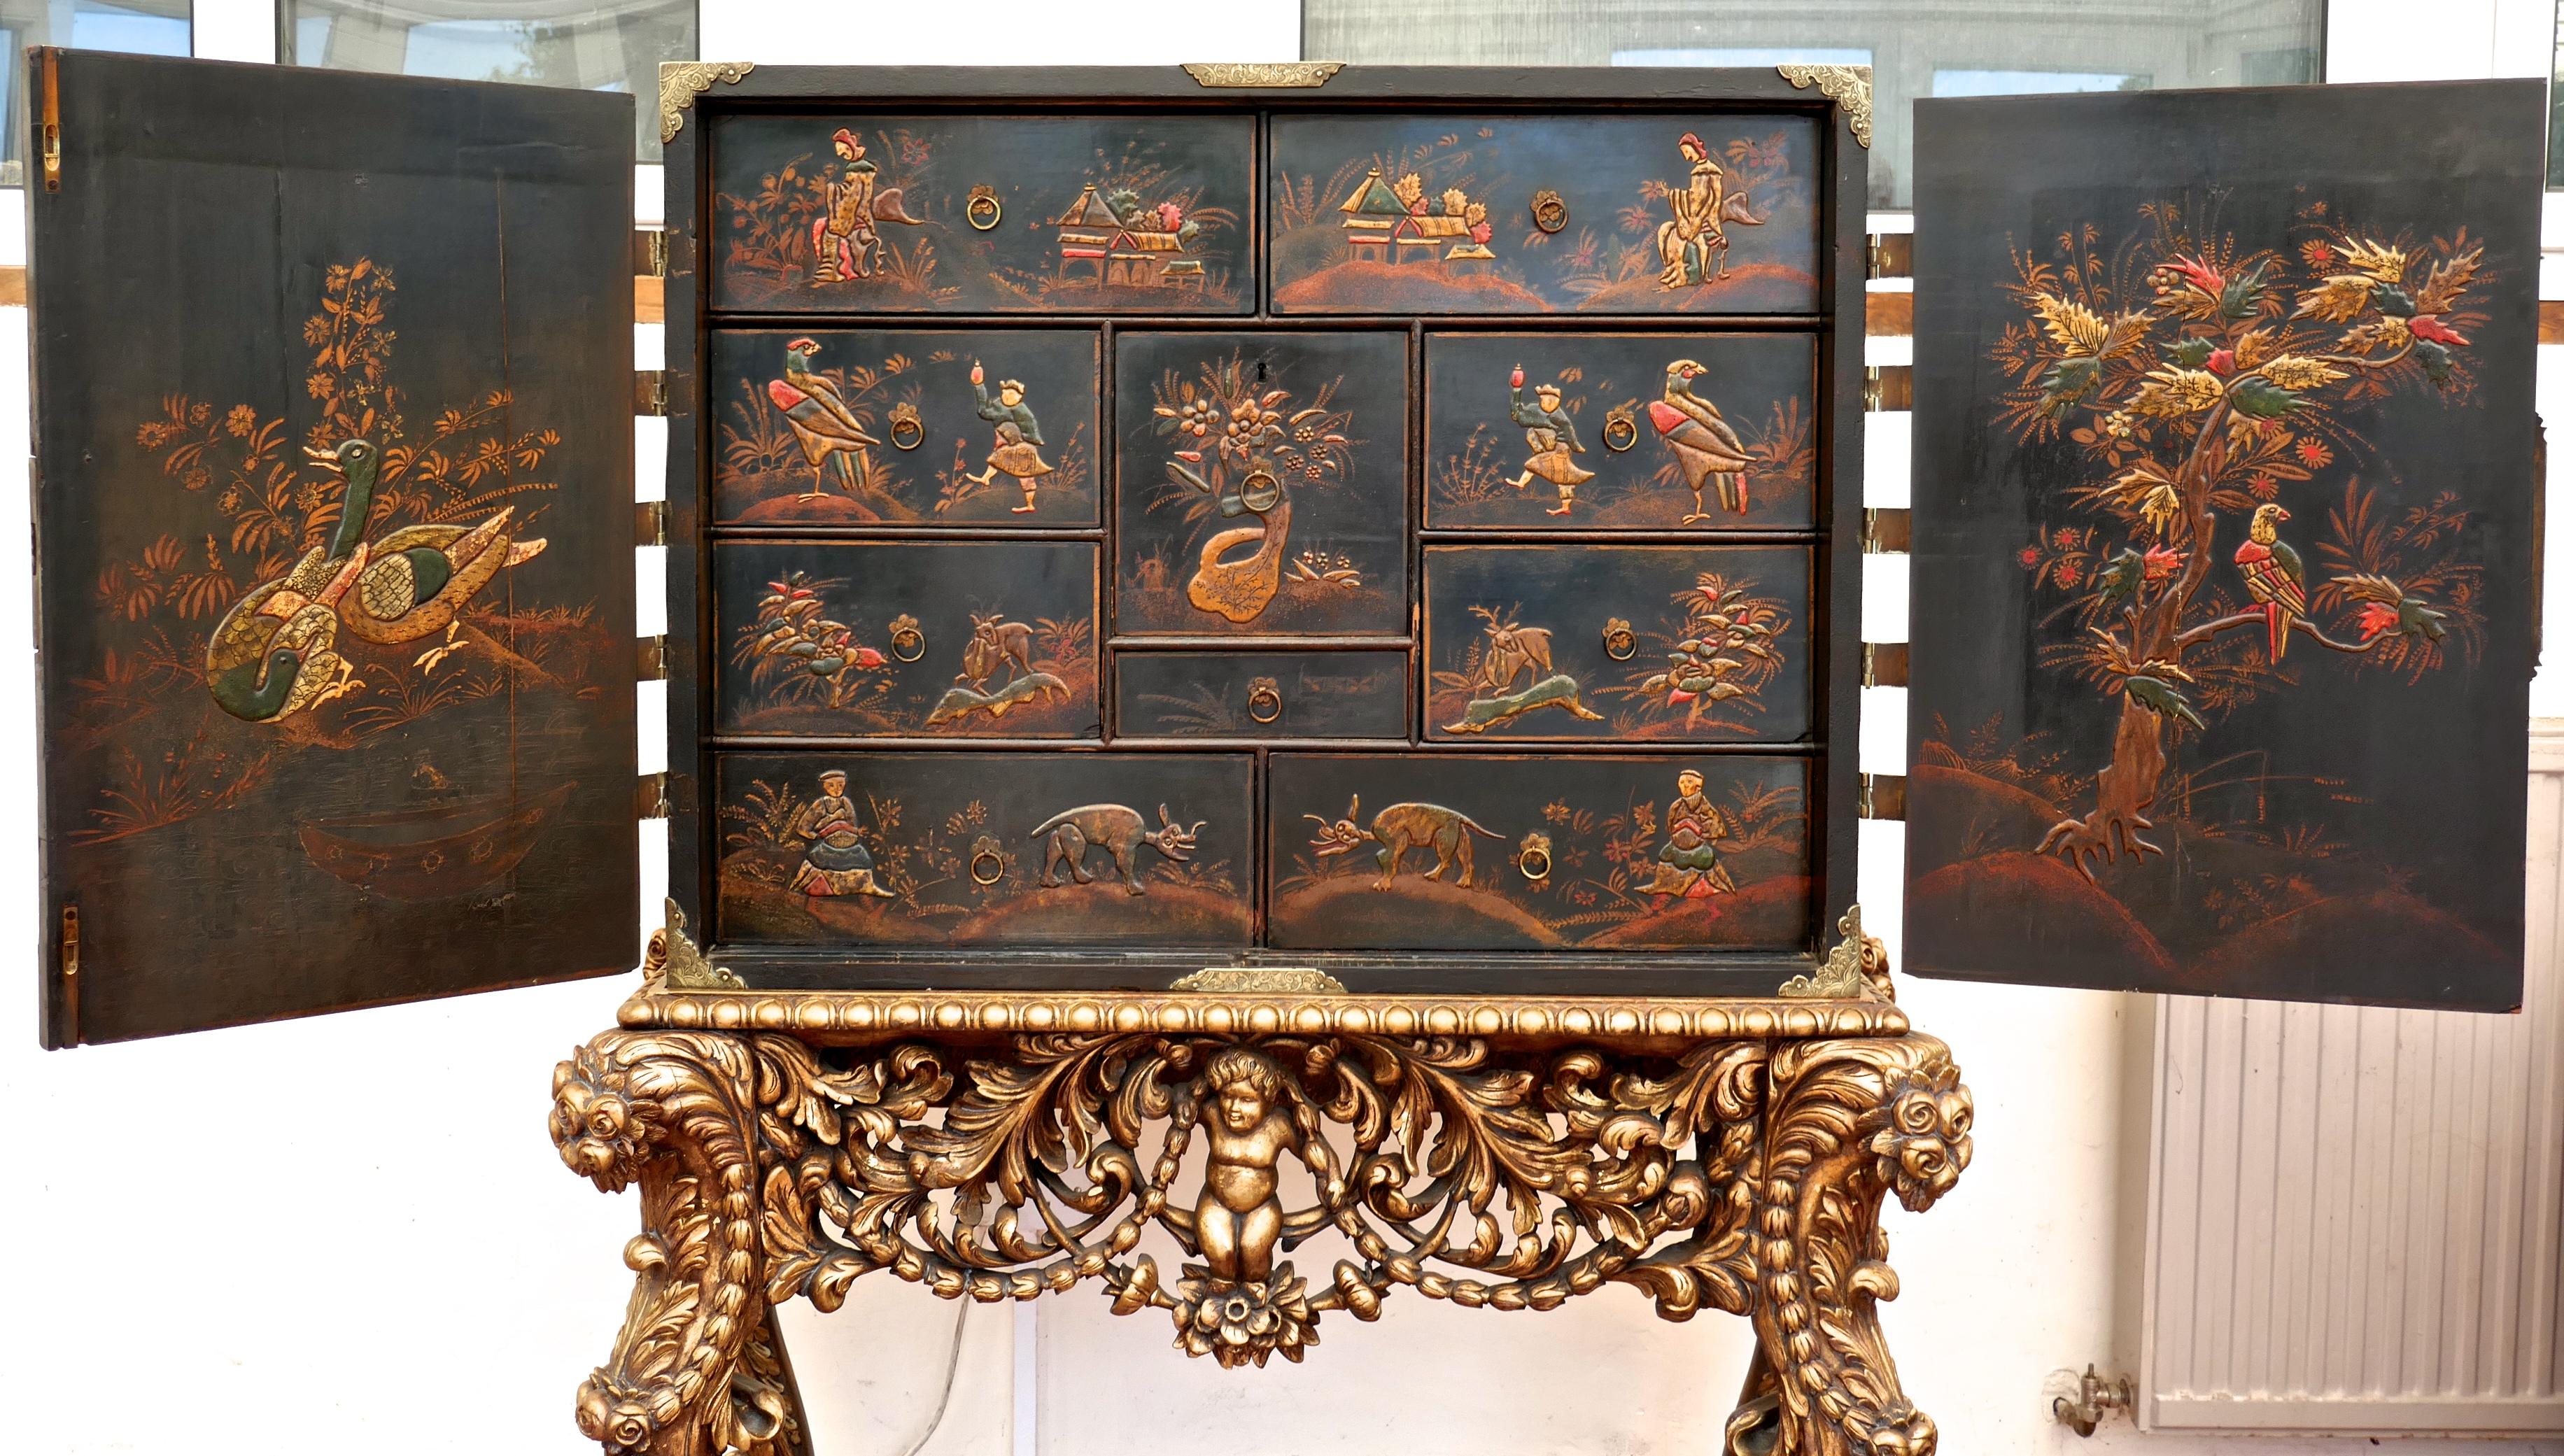 18th century Japanned collectors cabinet on stand, Clive of India. 

This wonderful collectors cabinet dates from the early part of the 18th century it has large doors enclosing ten drawers all of different sizes, the cabinet is japanned and